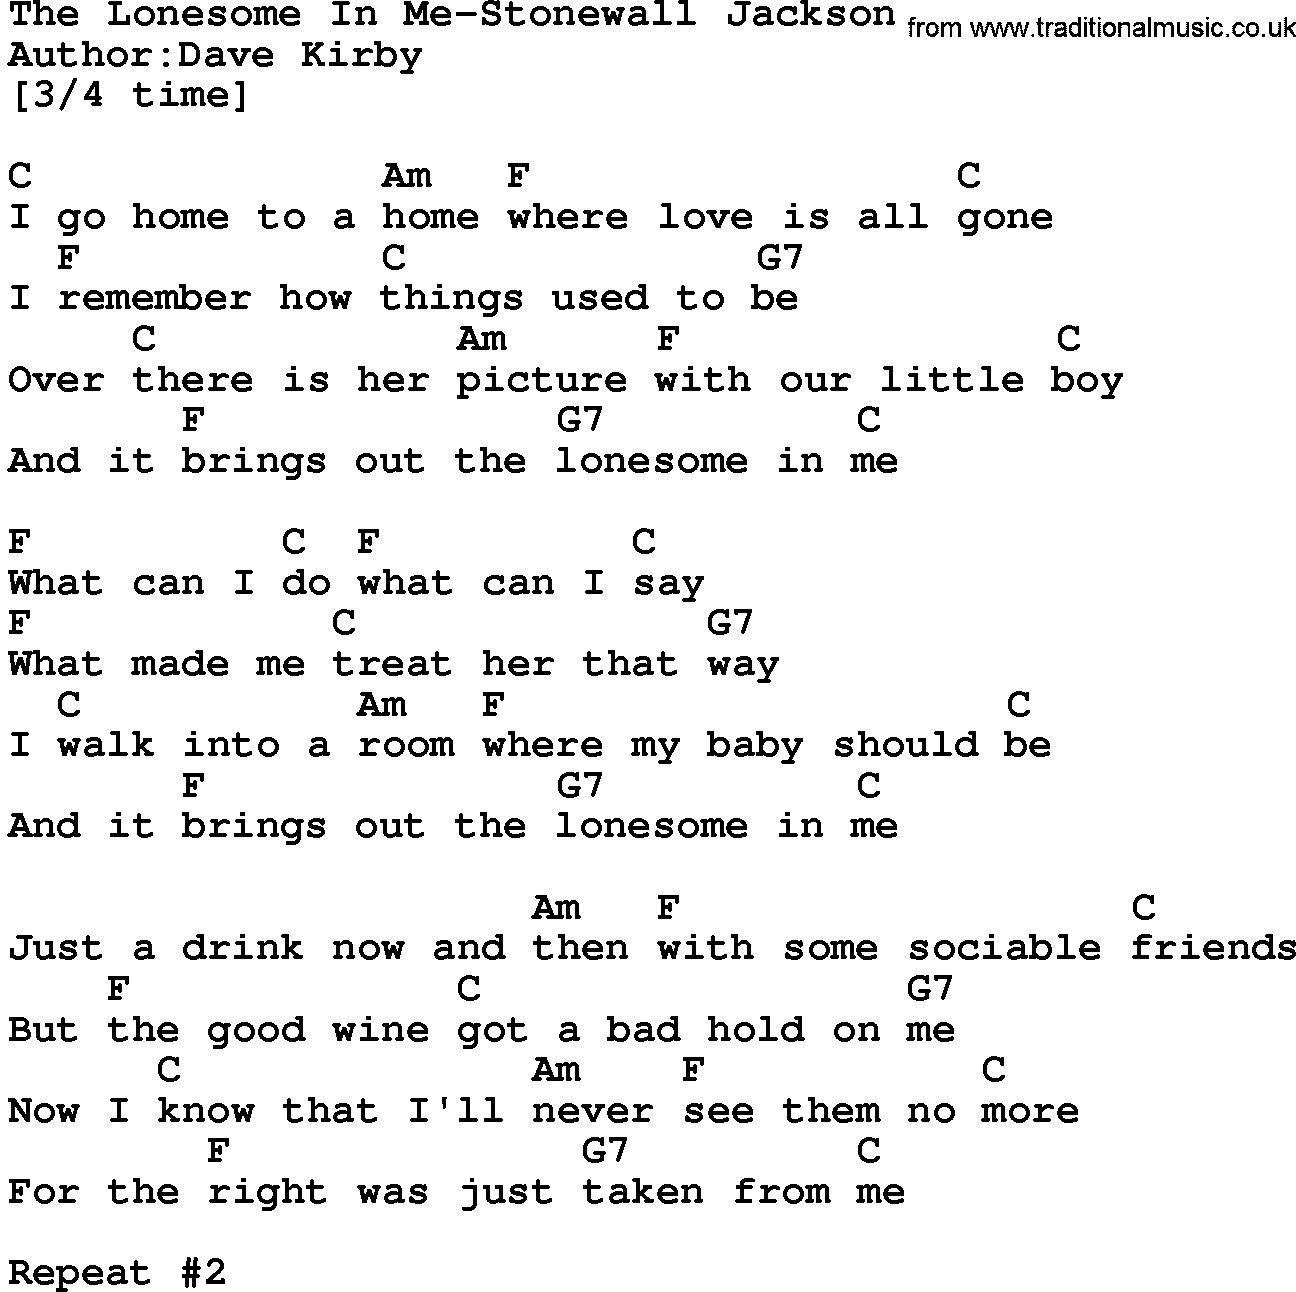 Country music song: The Lonesome In Me-Stonewall Jackson lyrics and chords